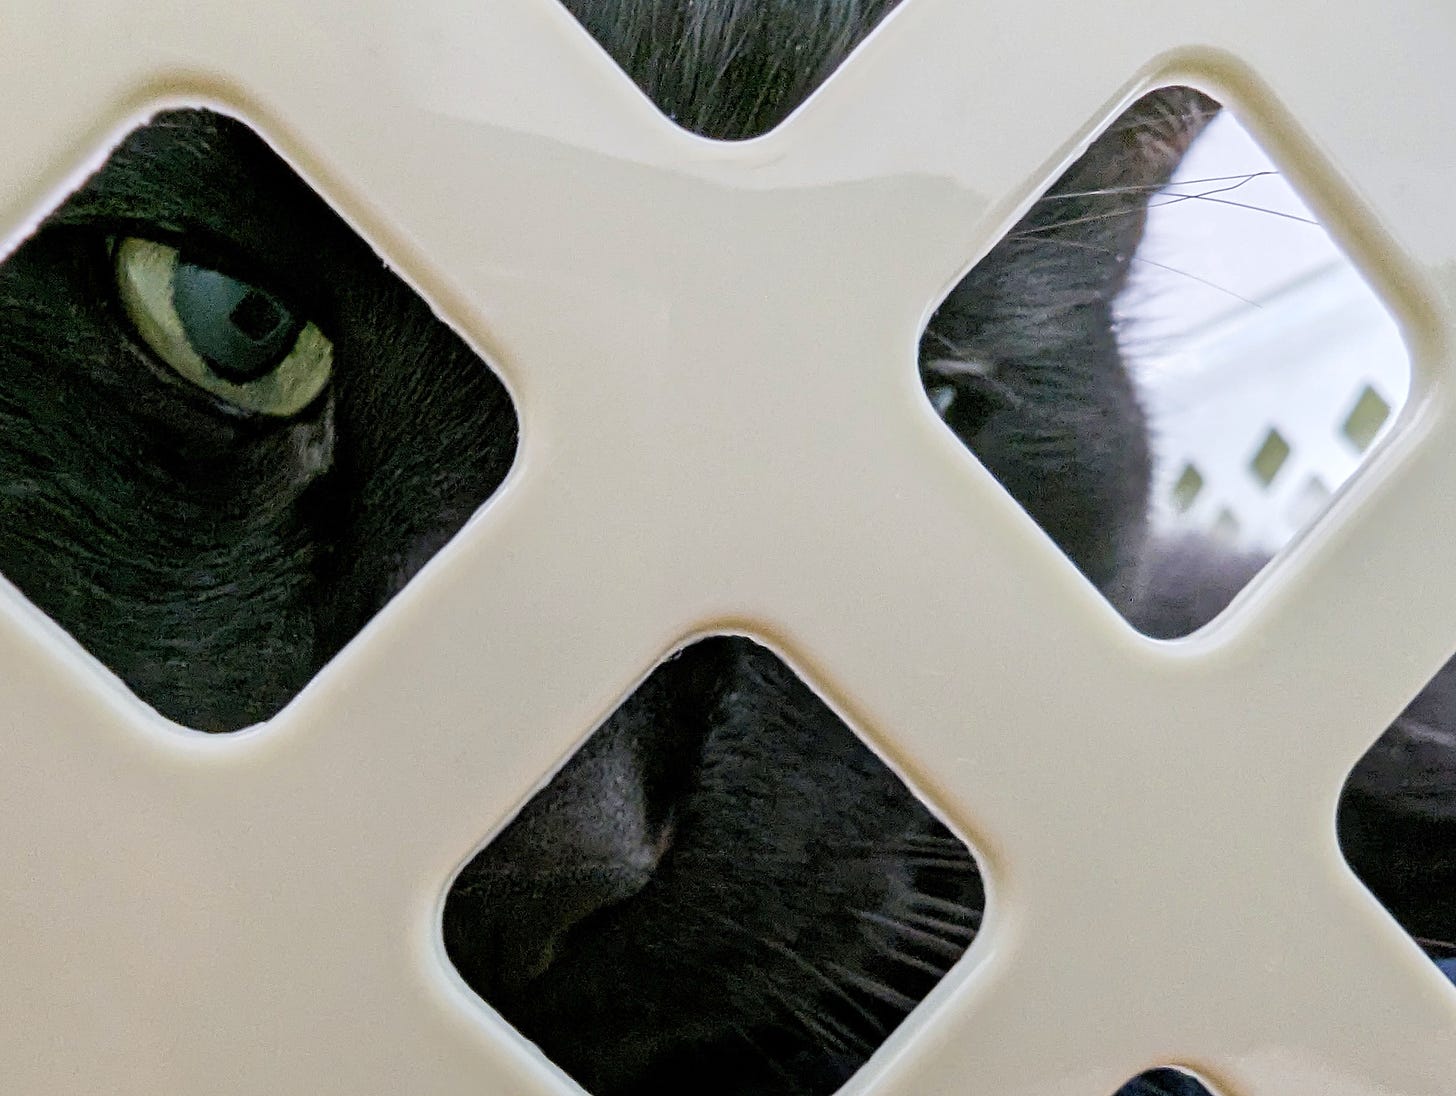 The close-up face of a black cat is mostly obscured by the side of a pale green plastic laundry basket. One green eye and his nose are visible through the holes.